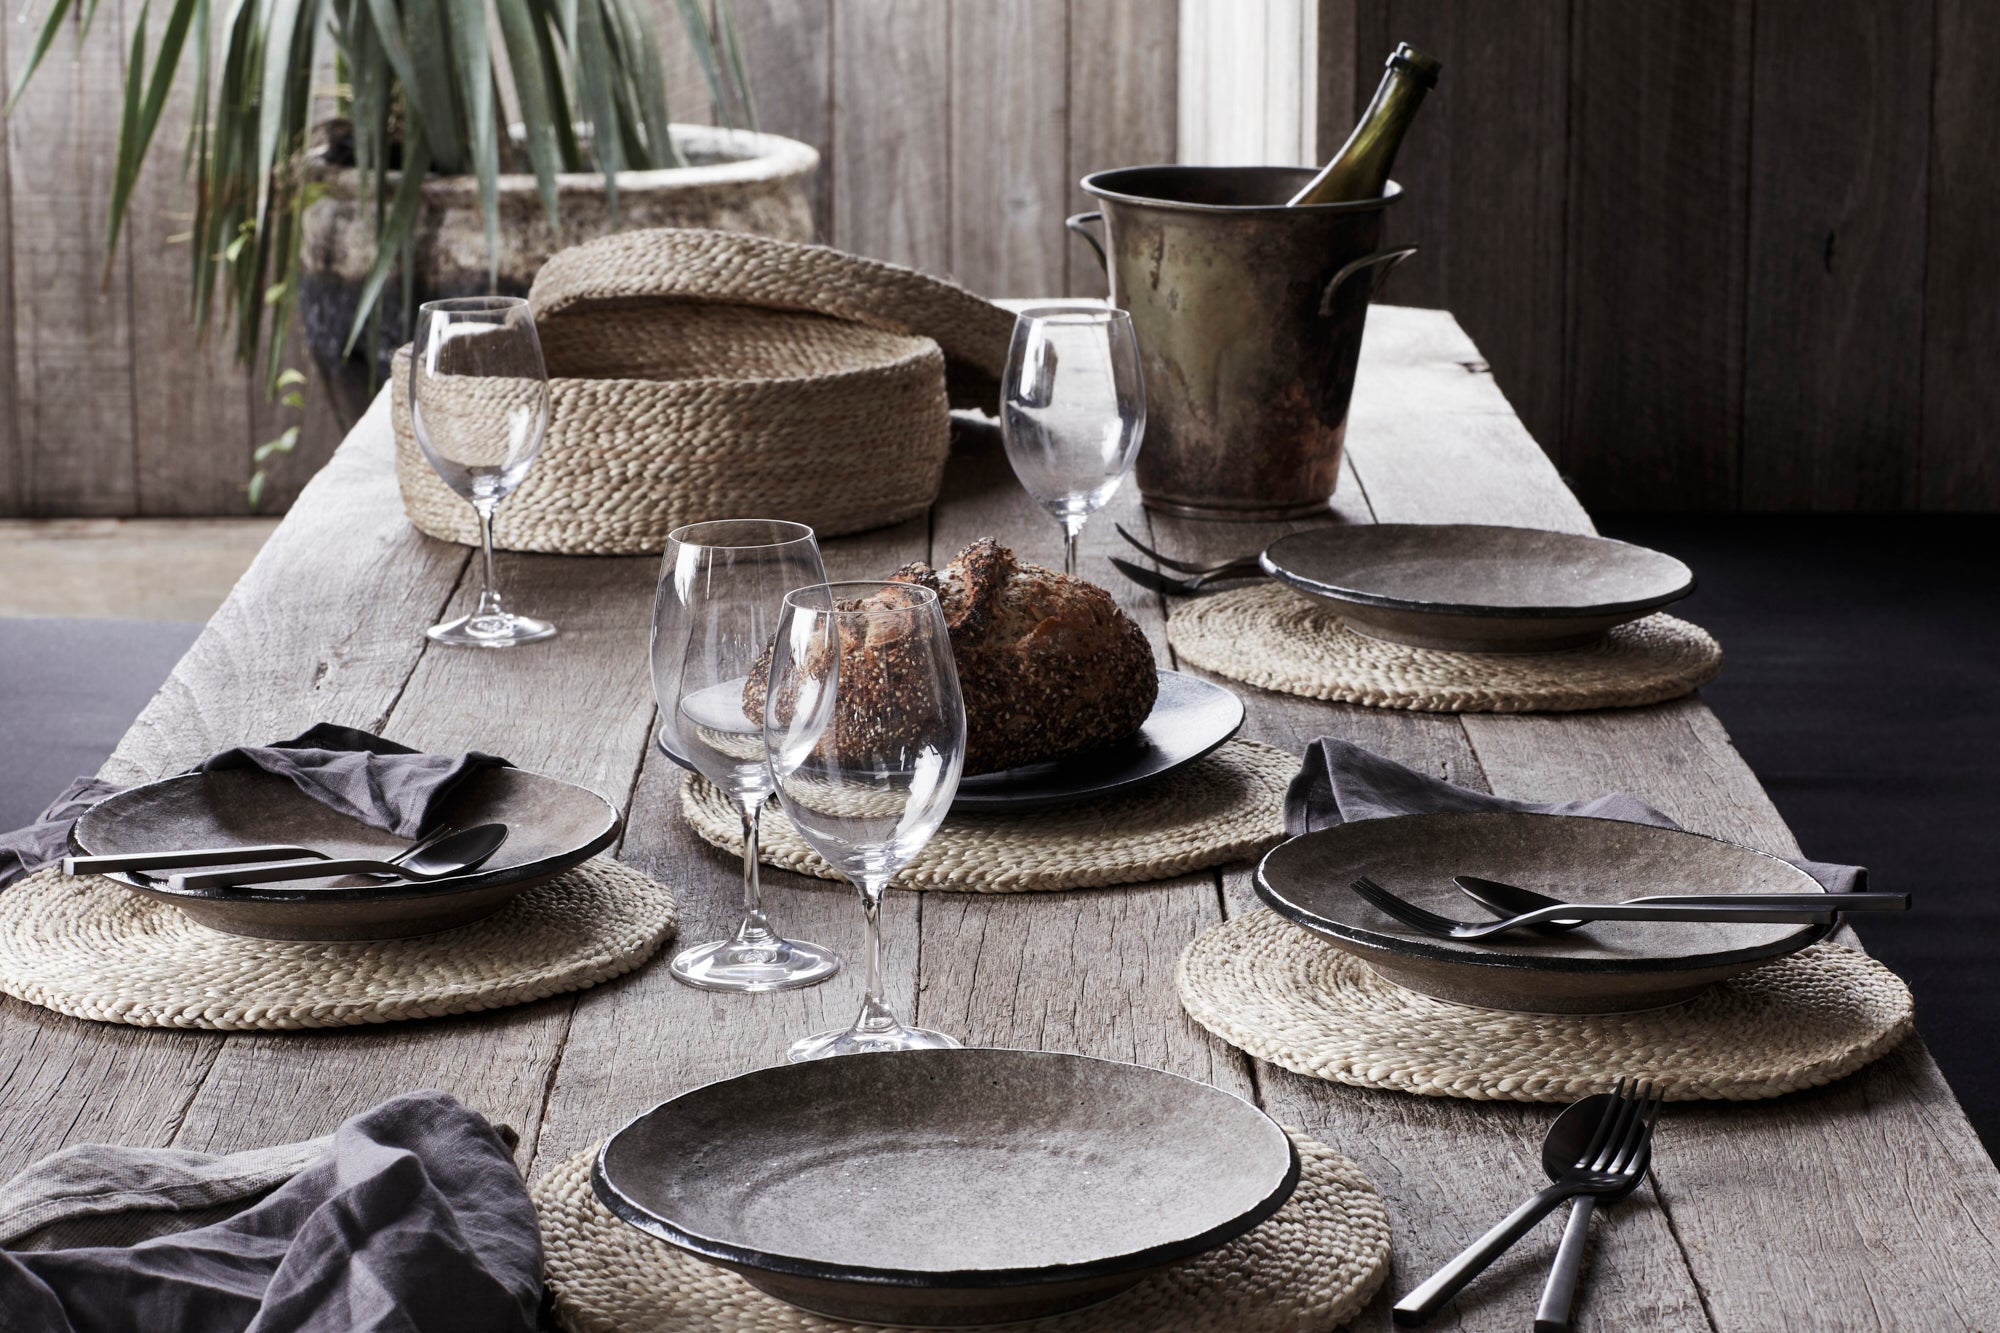 Dark moody table setting with jute placemats and coasters